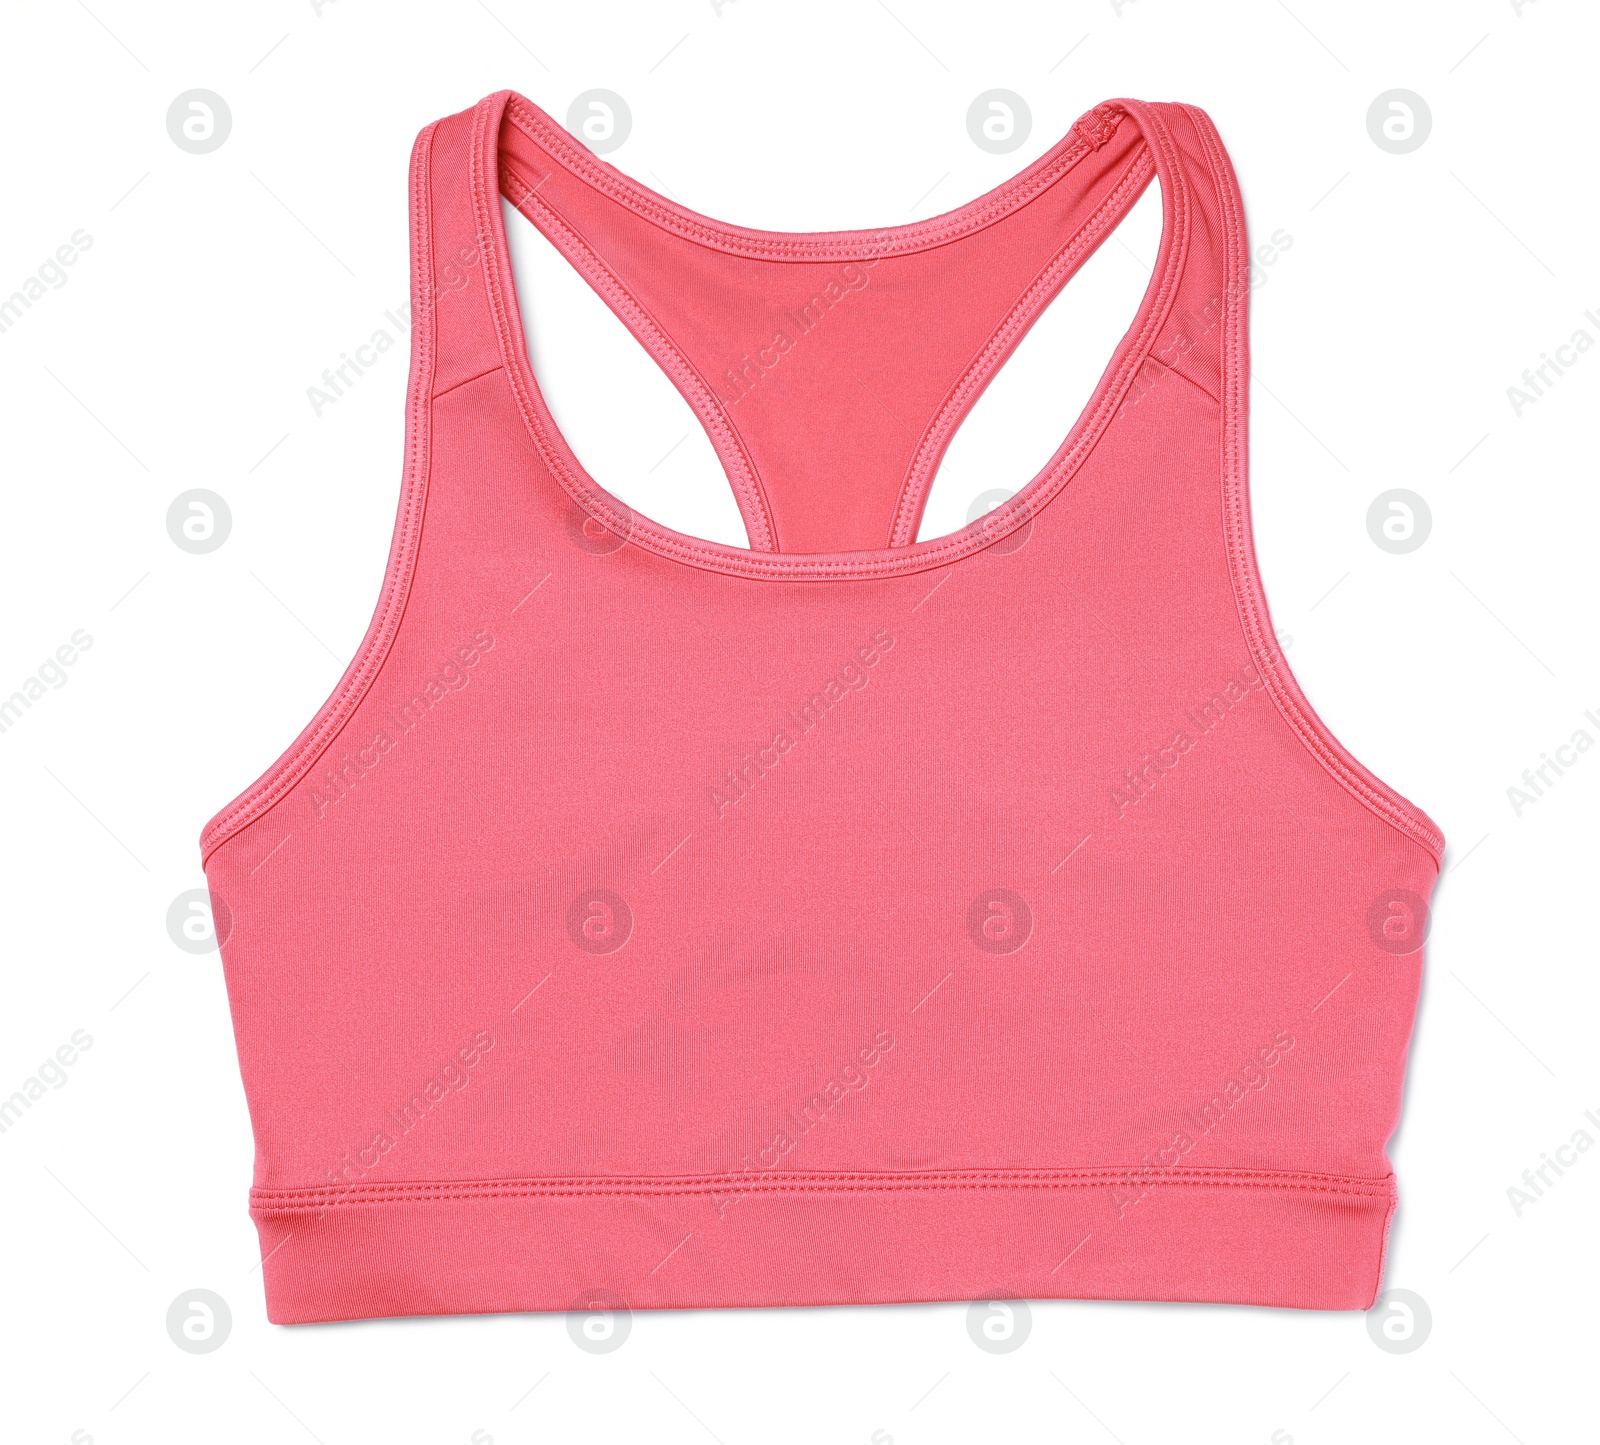 Photo of Pink sports bra isolated on white, top view. Comfortable wear